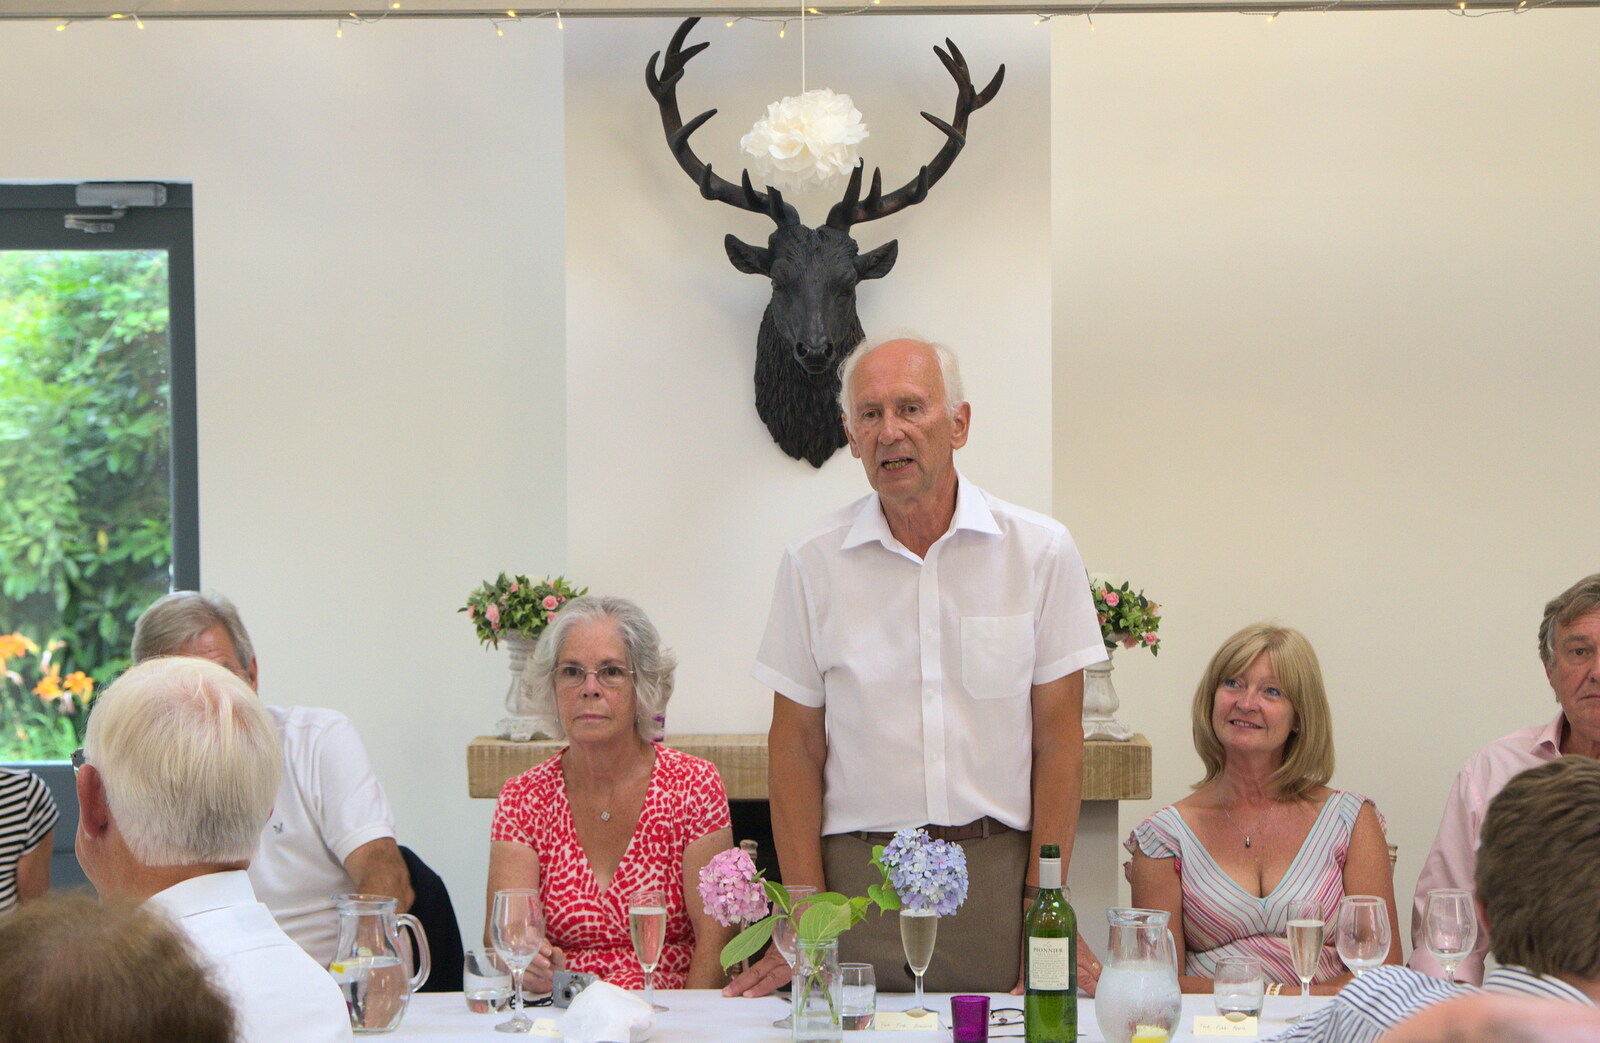 Bob does a speech from Bob and Bernice's 50th Wedding Anniversary, Hinton Admiral, Dorset - 25th July 2014